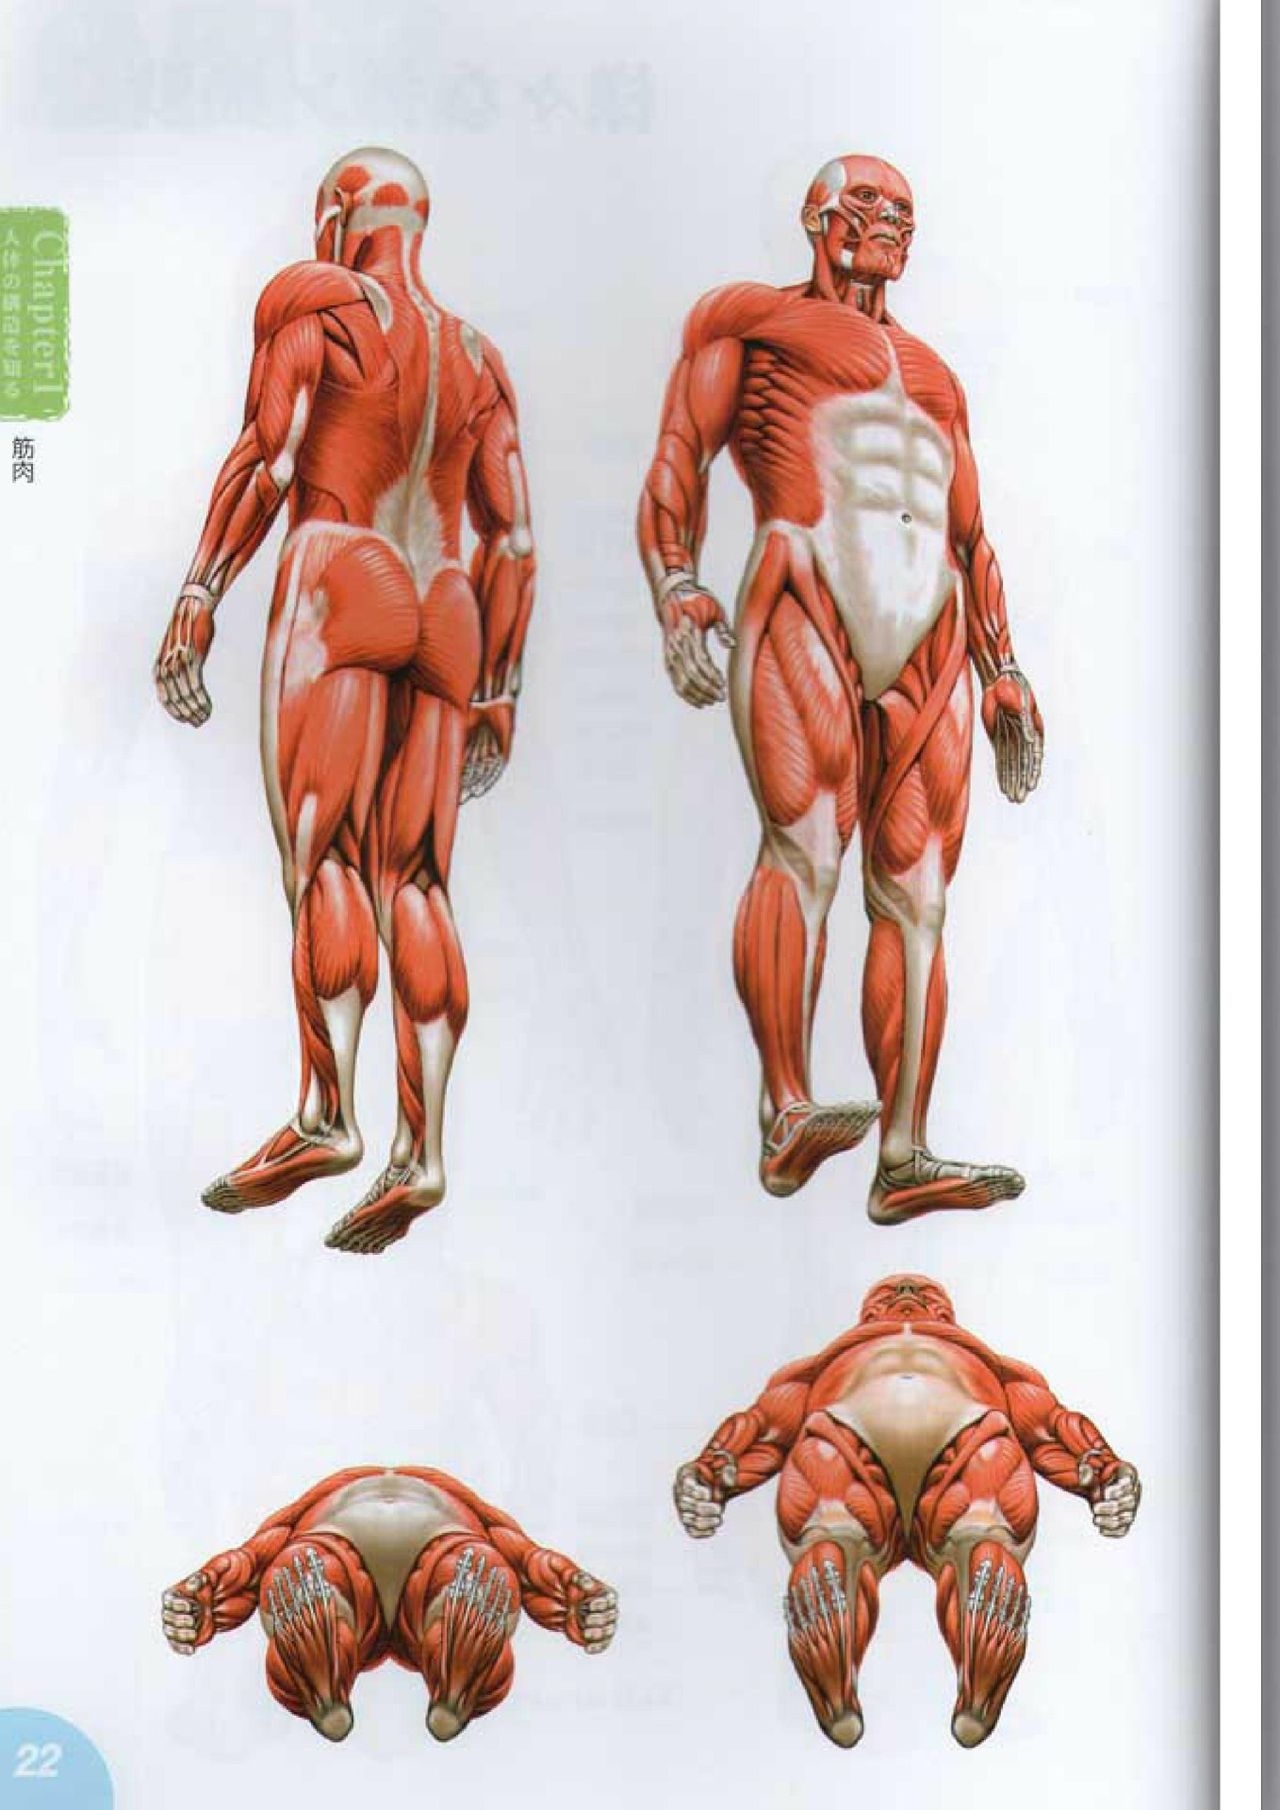 How to draw a character drawing from a human anatomical chart 21